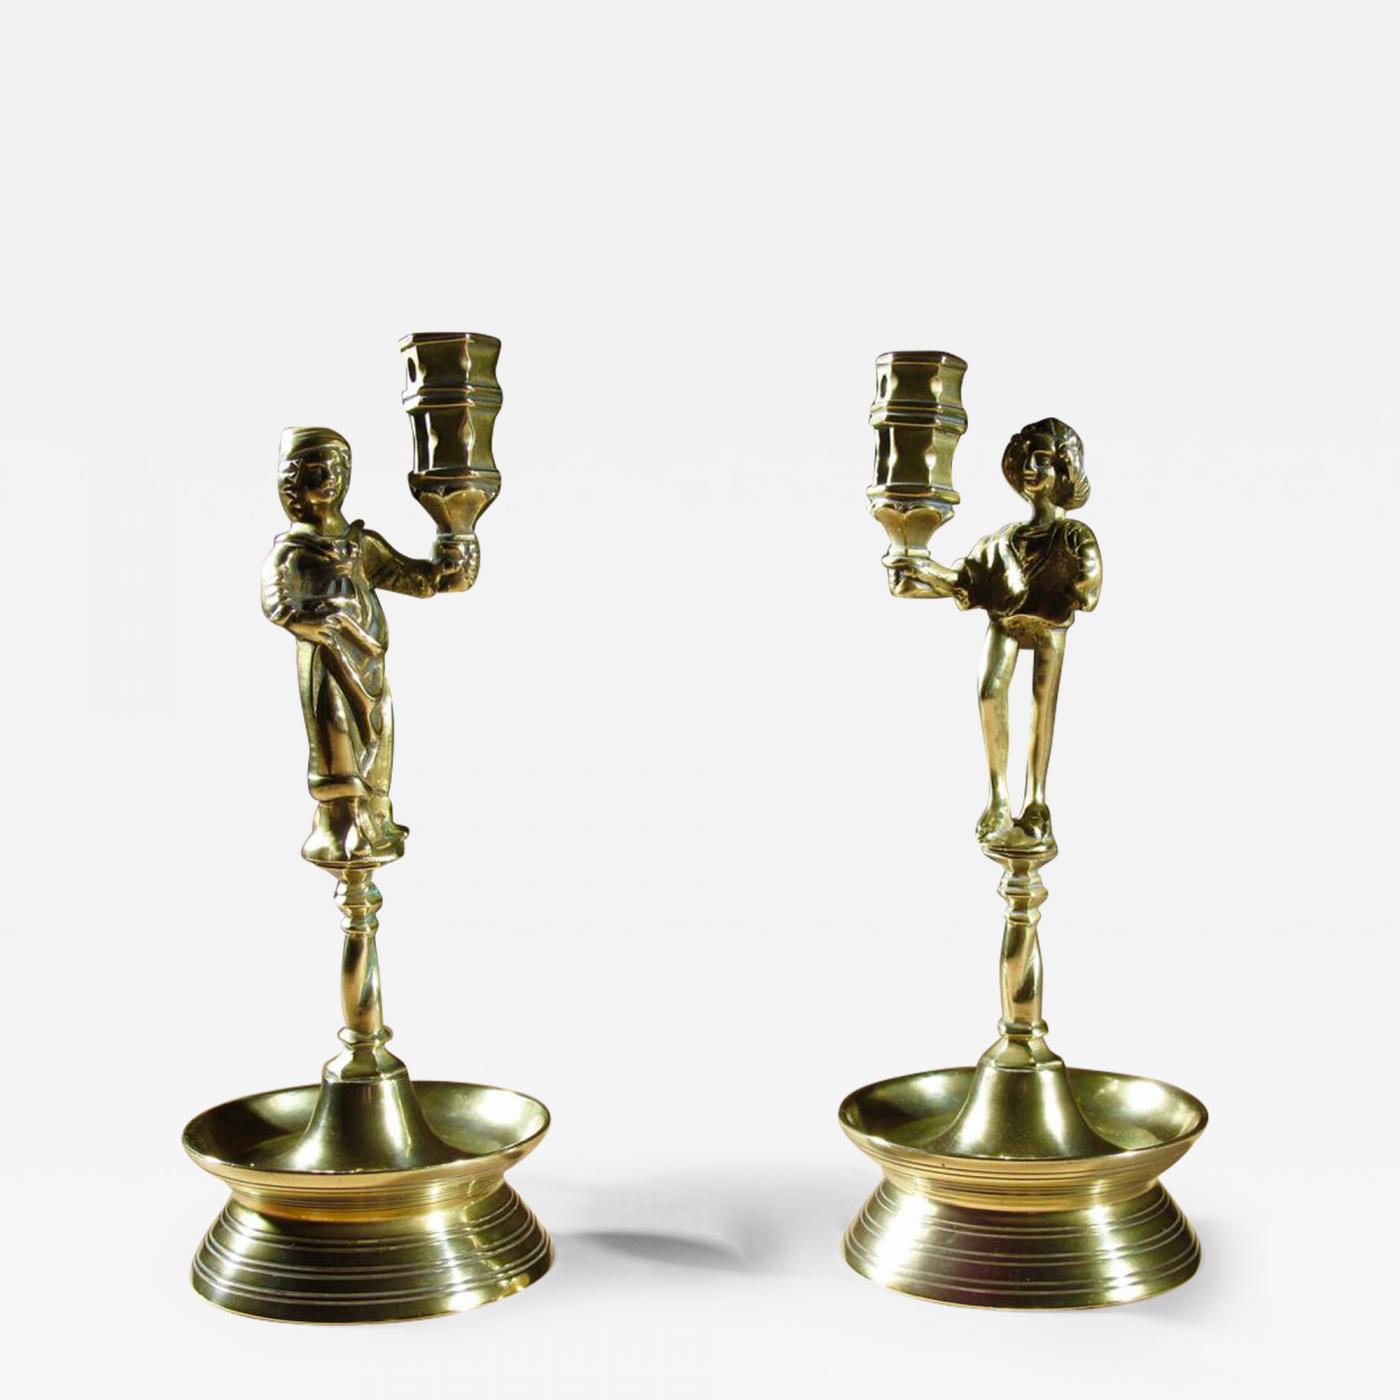 https://cdn.incollect.com/sites/default/files/zoom/A-Rare-Pair-And-Very-Decorative-Brass-Neo-Gothic-Candlesticks-678278-3333513.jpg